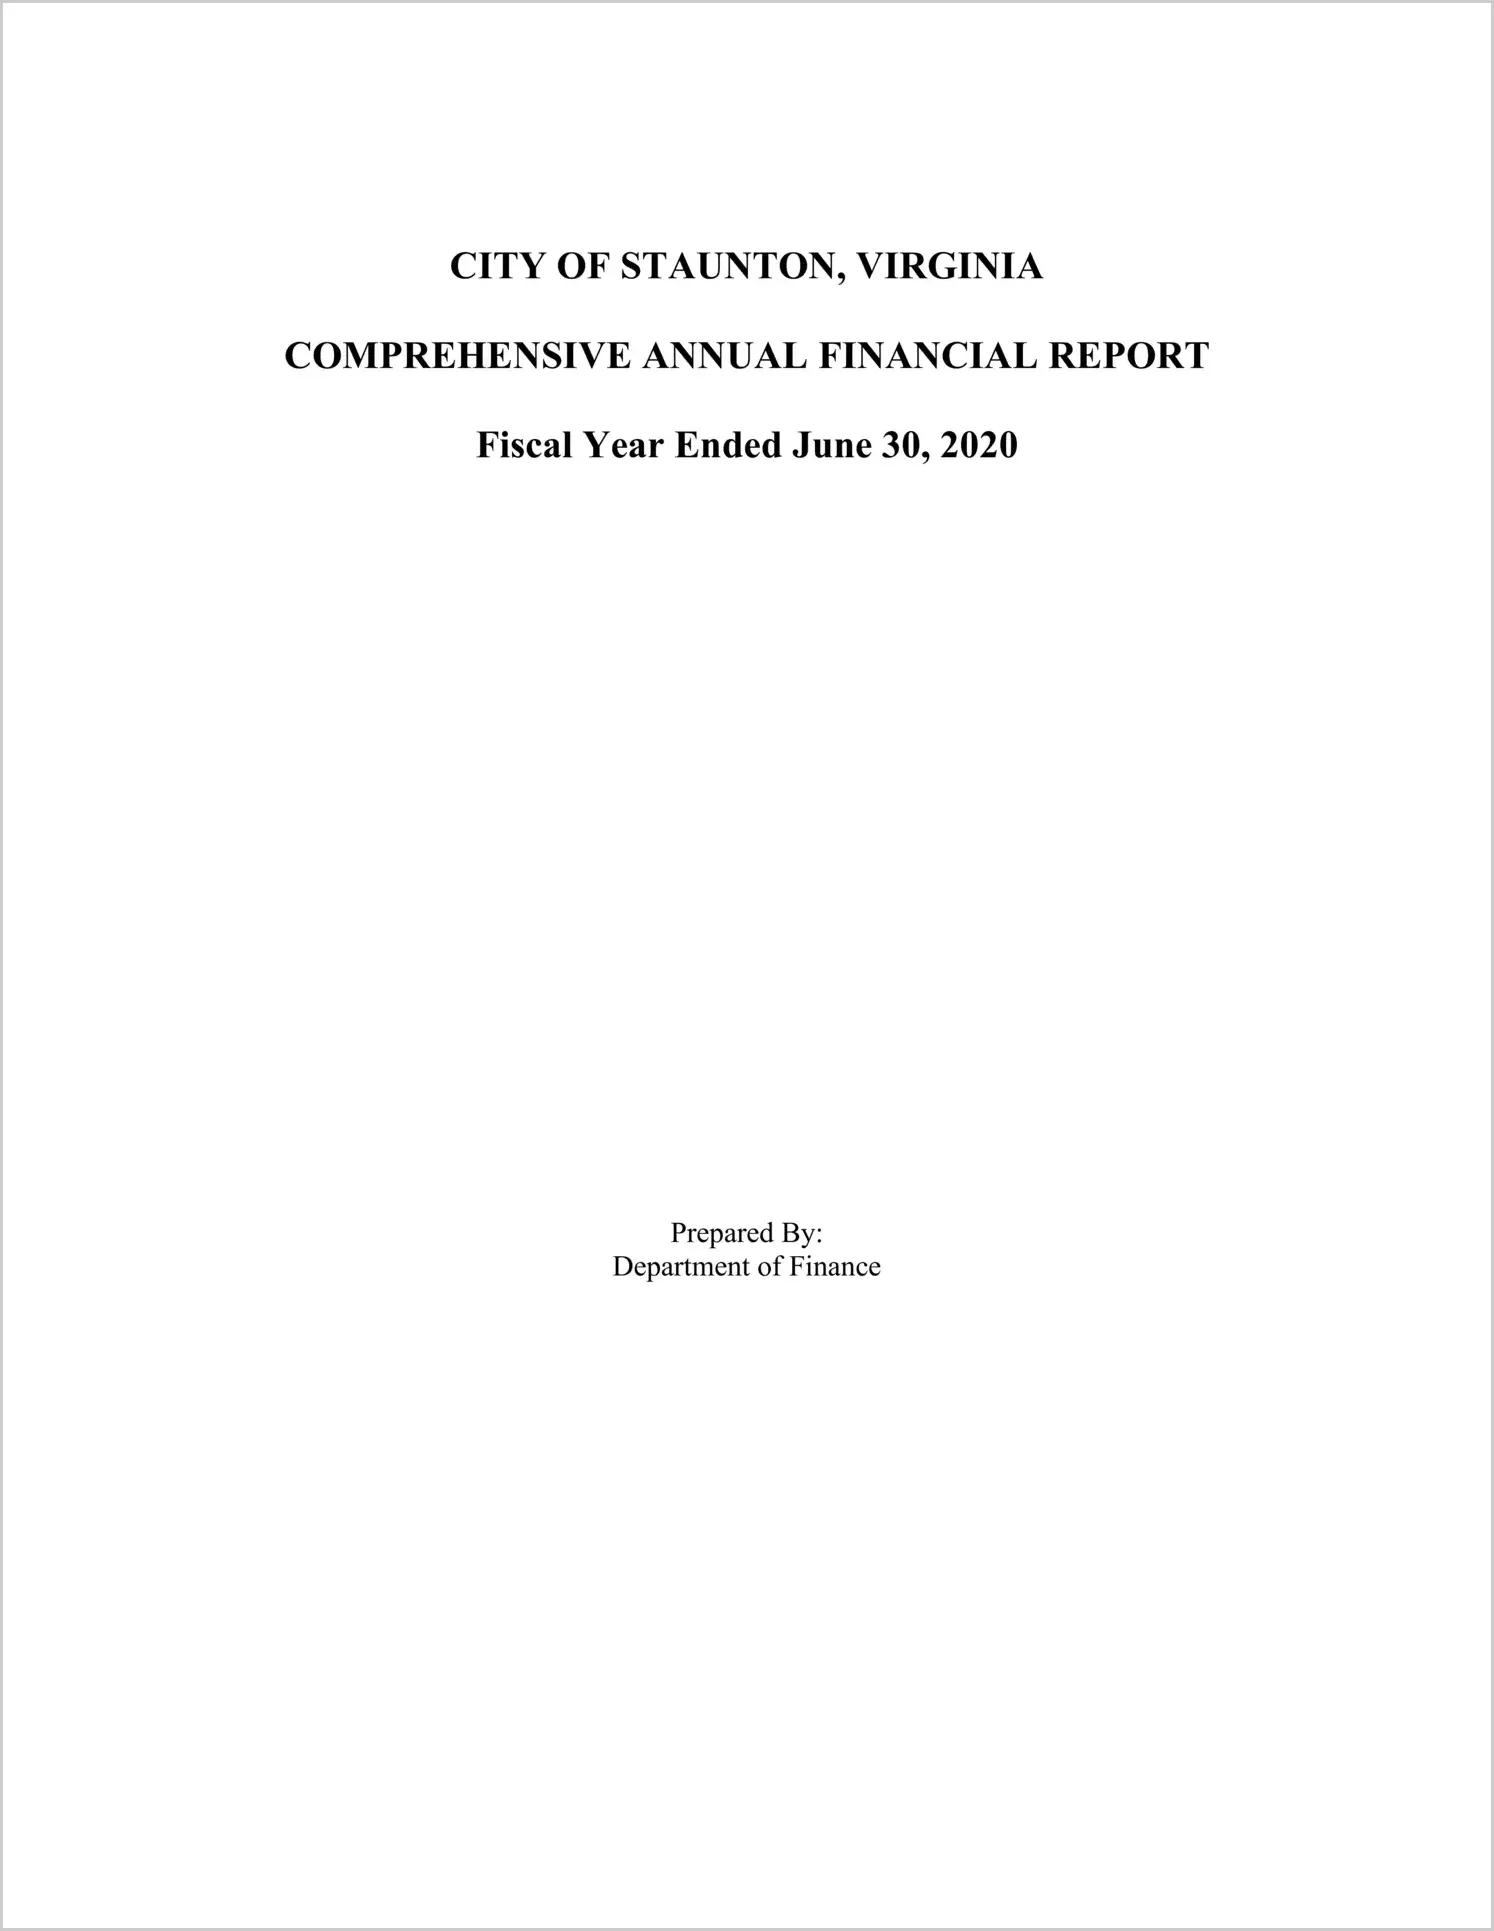 2020 Annual Financial Report for City of Staunton